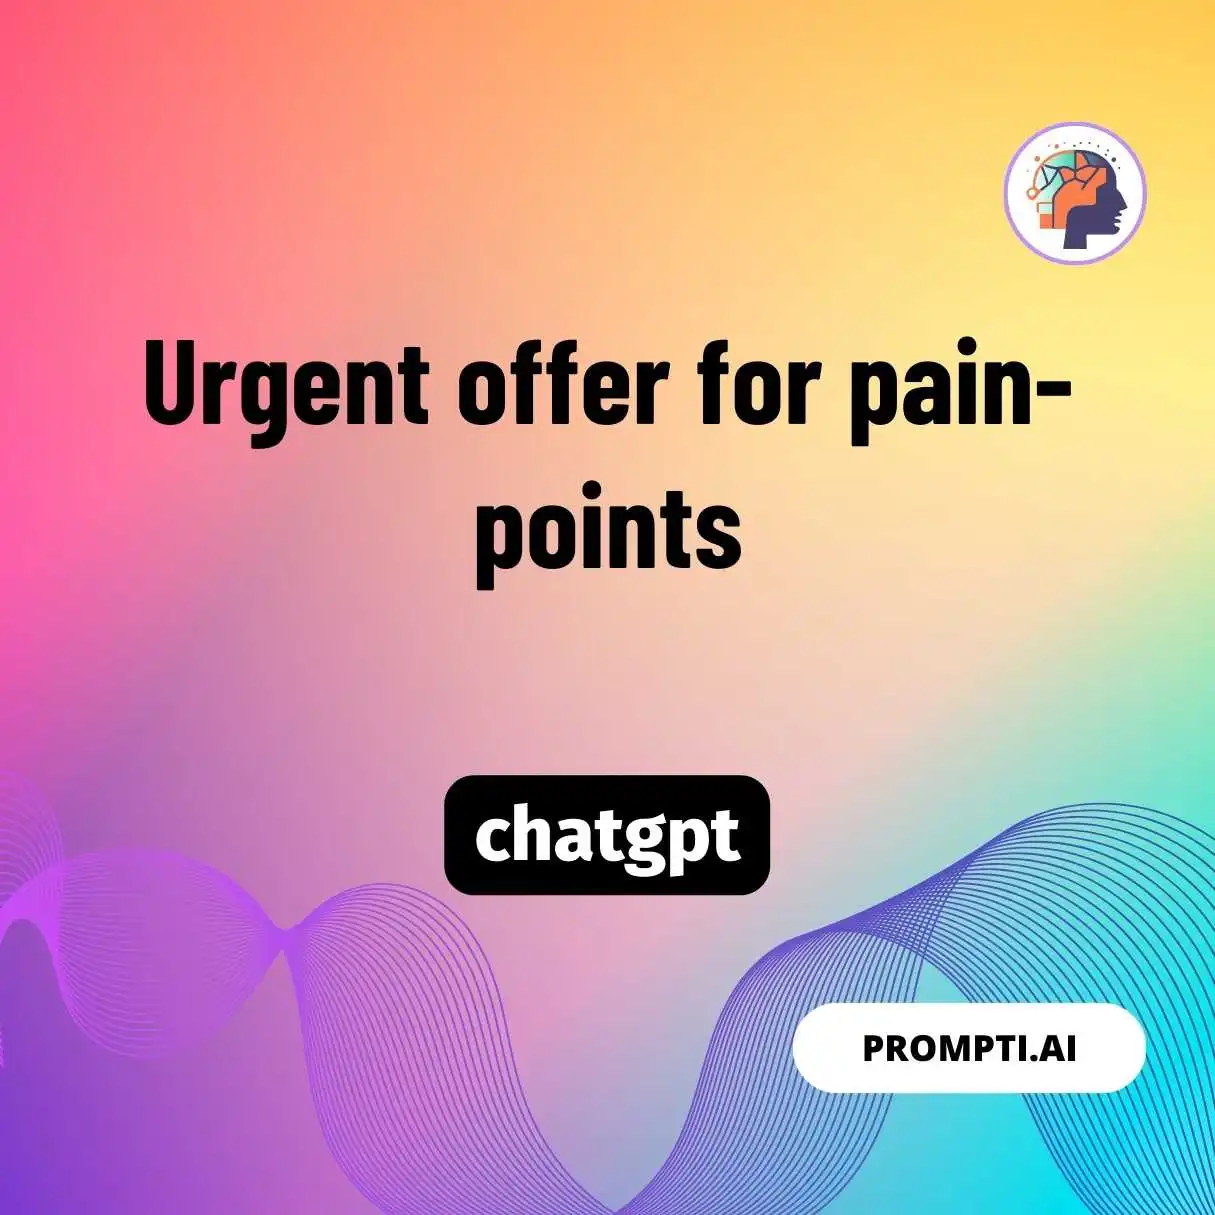 Urgent offer for pain-points